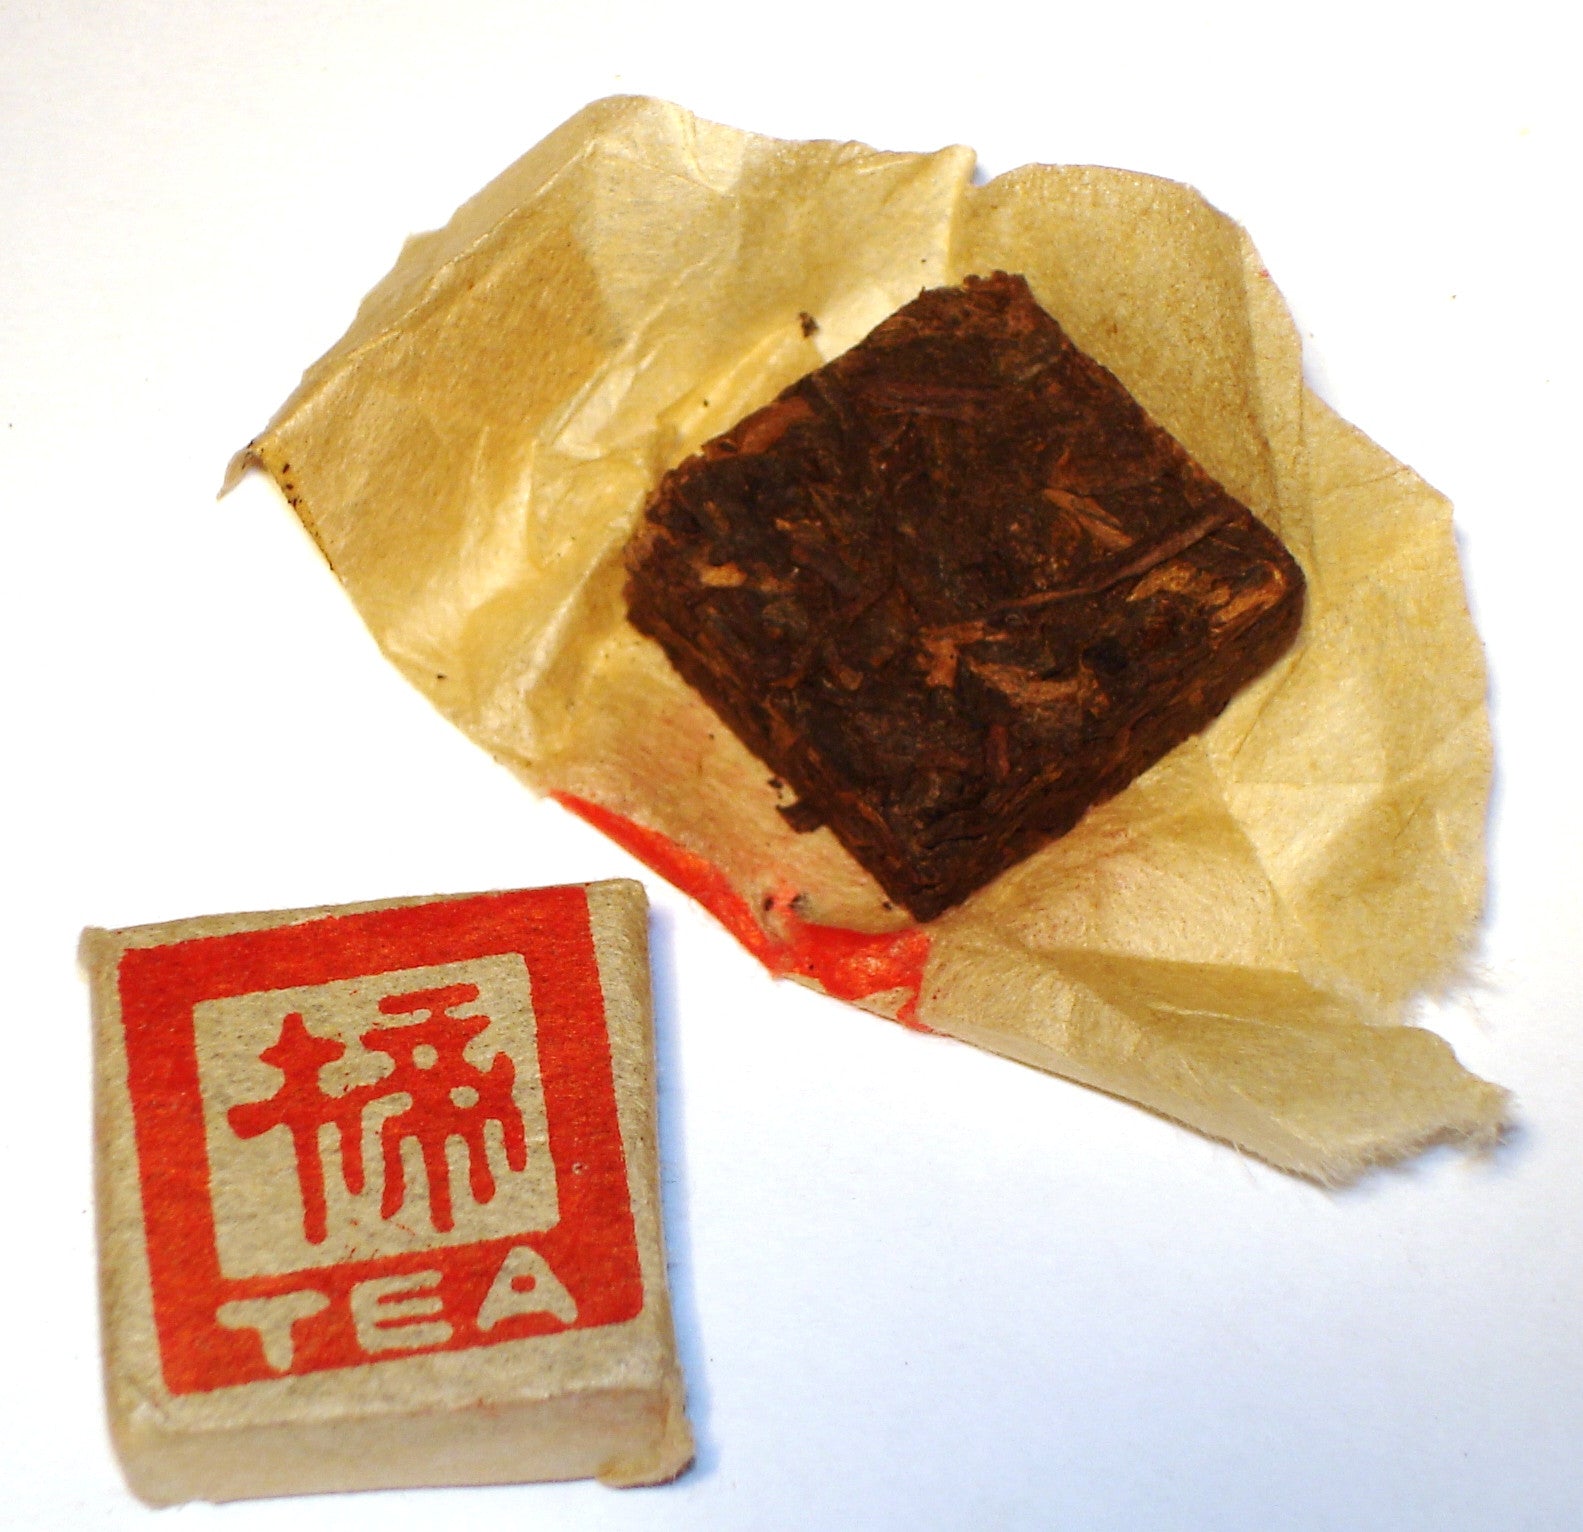 Mini Fangcha Chinese Shou Pu-erh tea brick in an open package, next to a sealed beige package with red characters